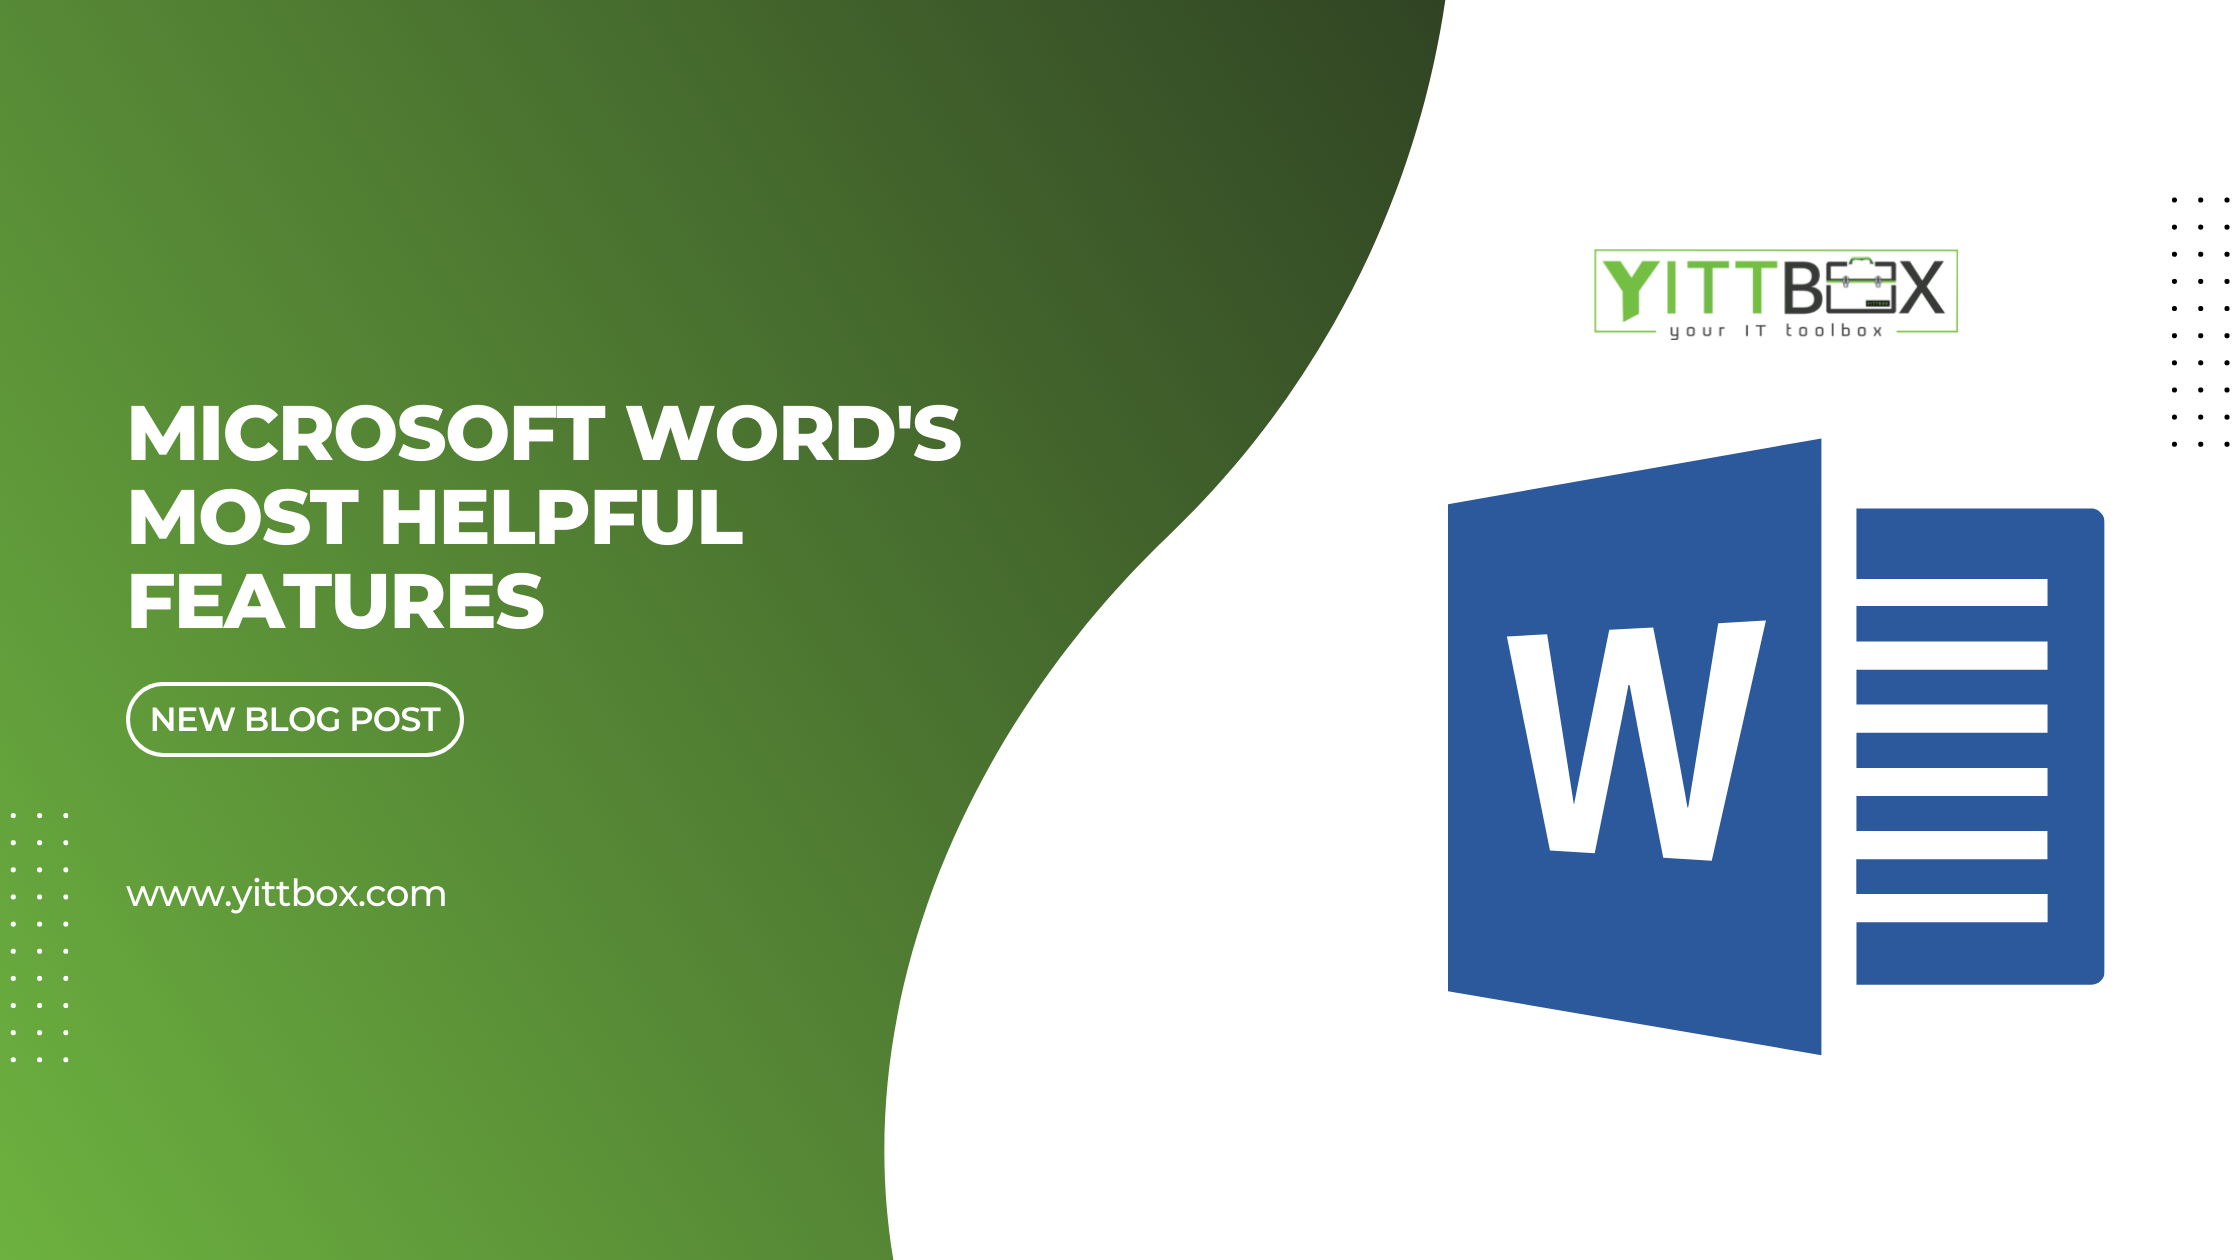 Microsoft Word's Most Helpful Features